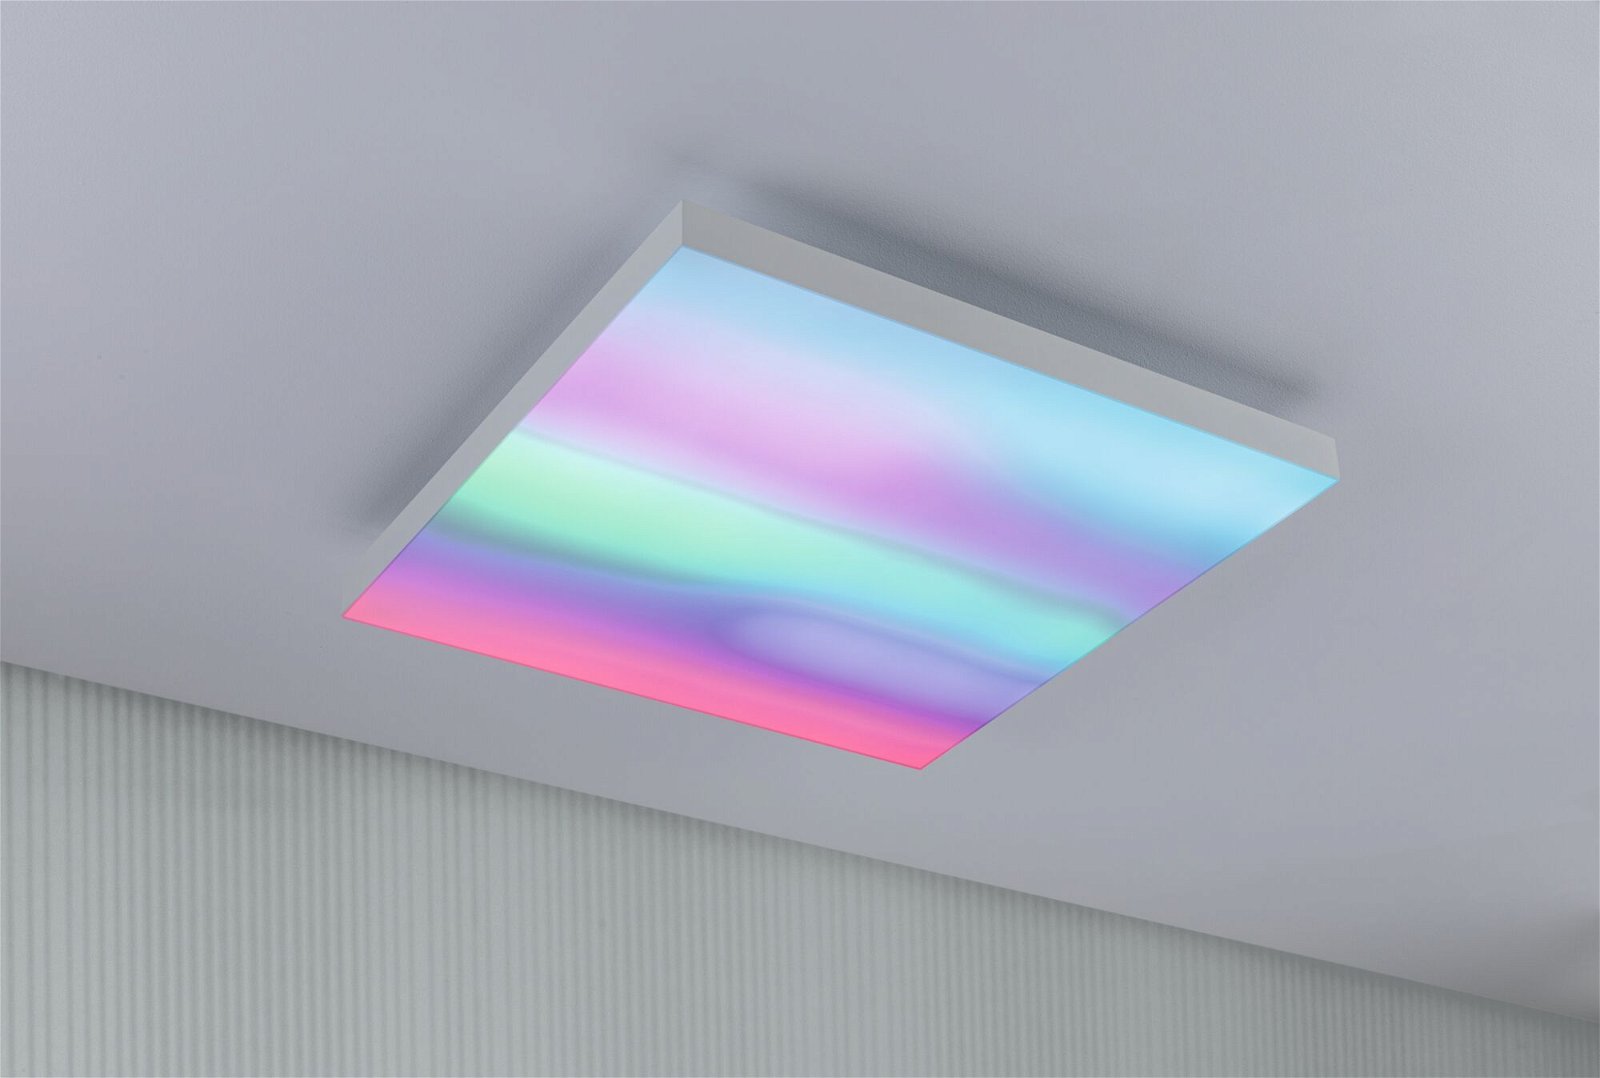 LED Panel Velora Rainbow dynamicRGBW square 450x450mm 19W 1690lm 3000 - 6500K White dimmable